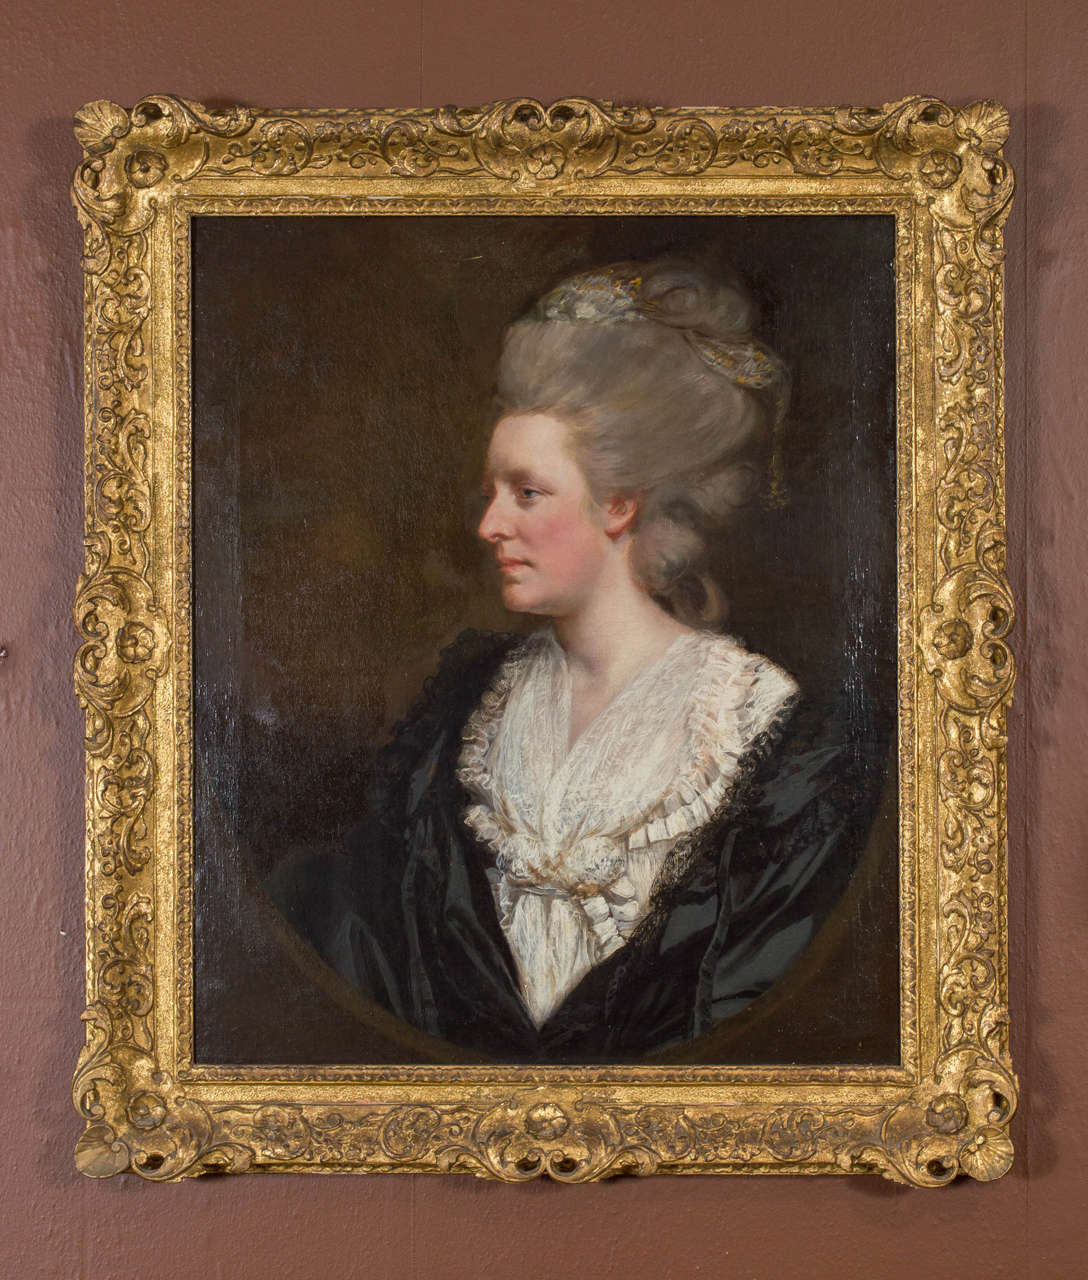 A beautifully executed 18th century British portrait of a lady. Oil on canvas.